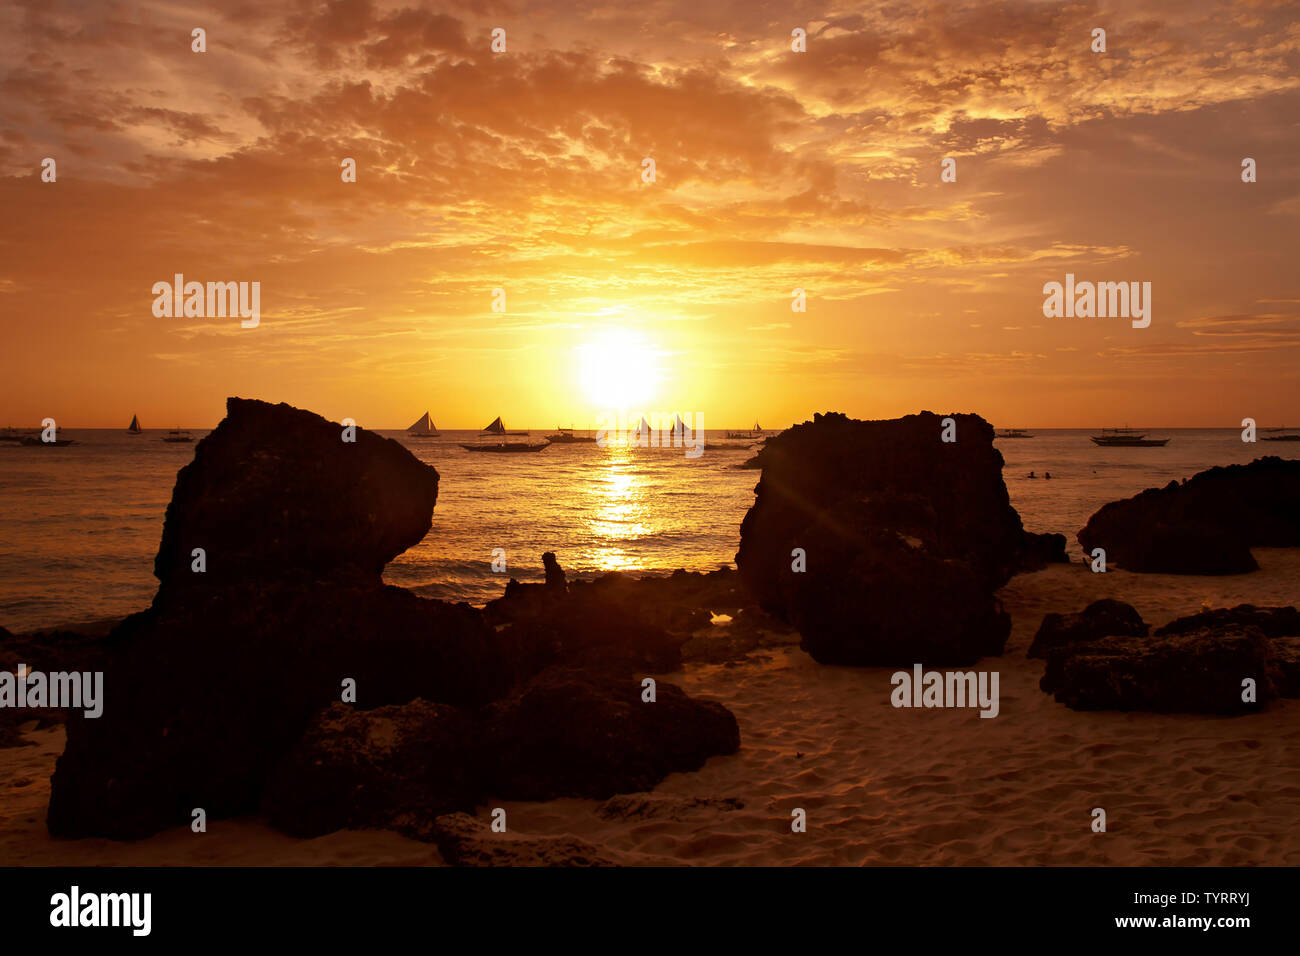 big rocks on beach at sunset with boats in sea in background, Boracay island, the Philippines Stock Photo